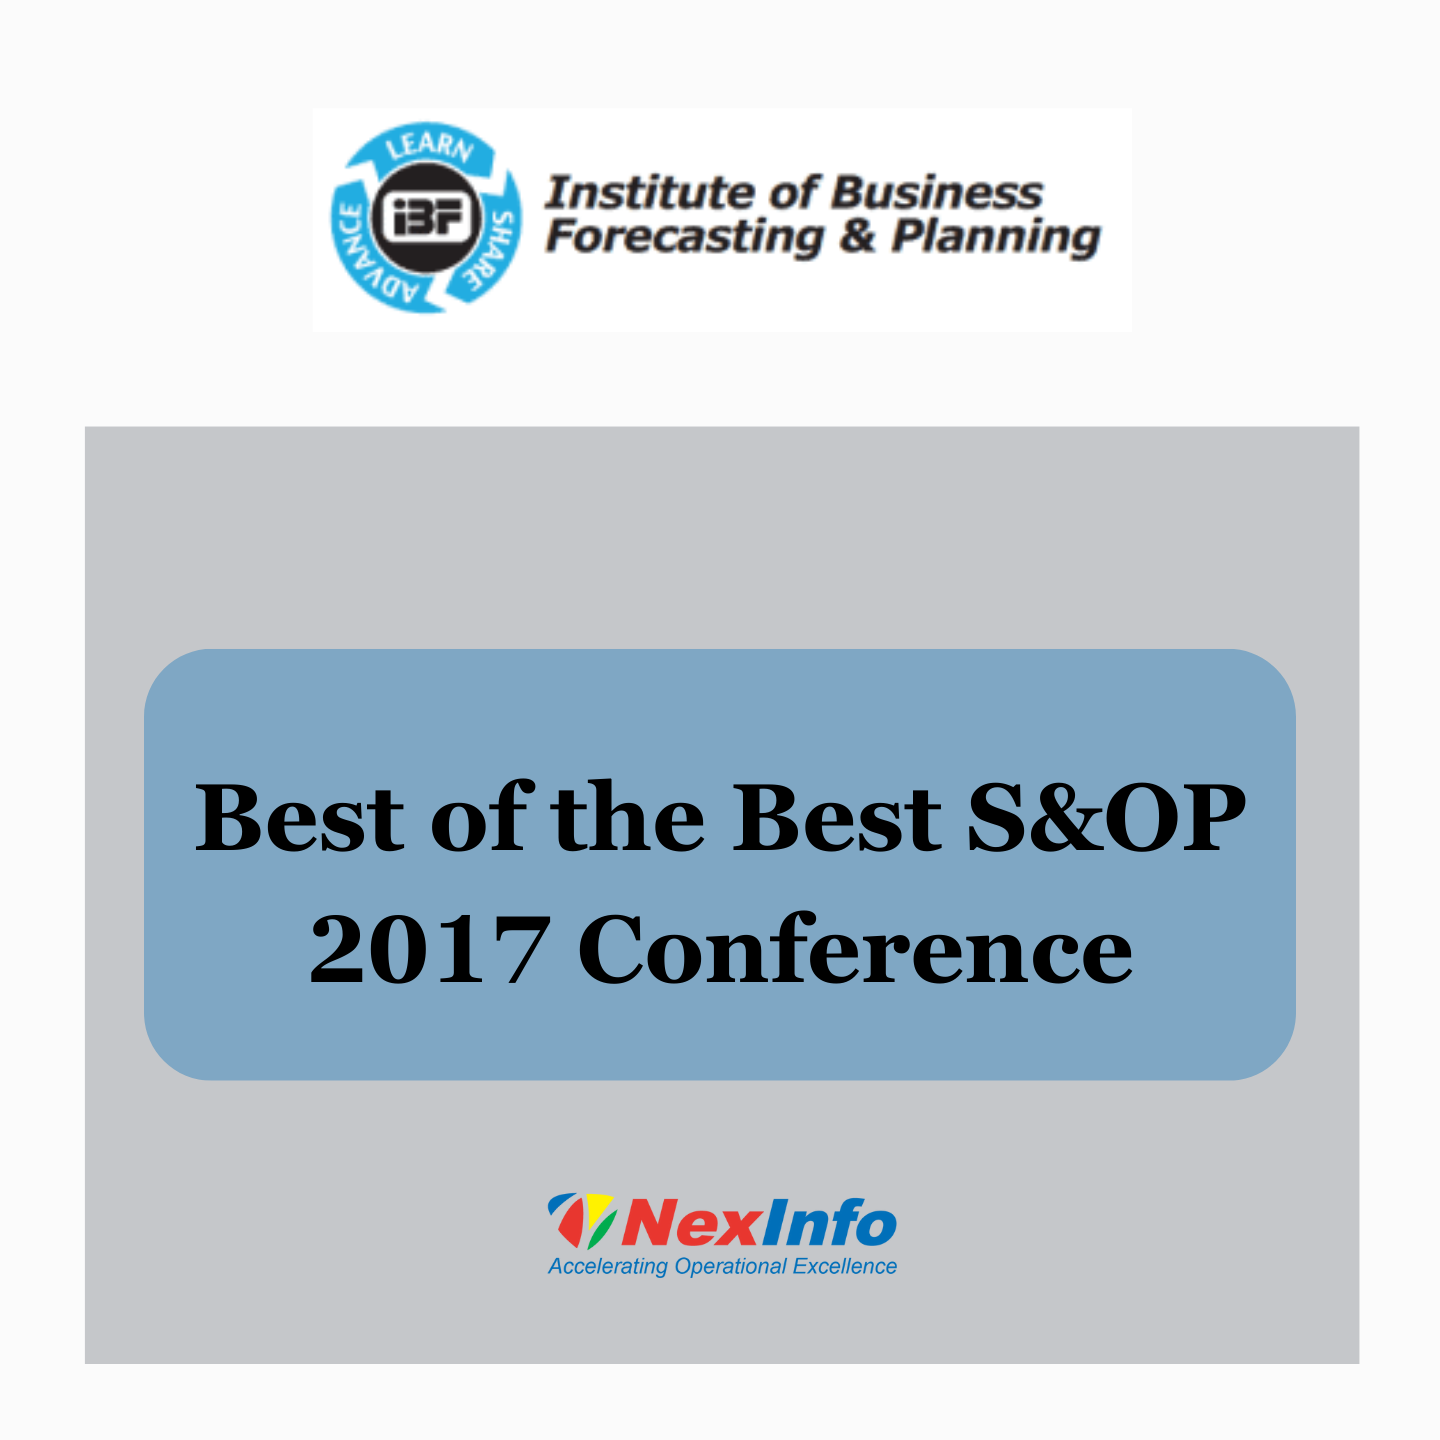 Best of the Best S&OP 2017 Conference